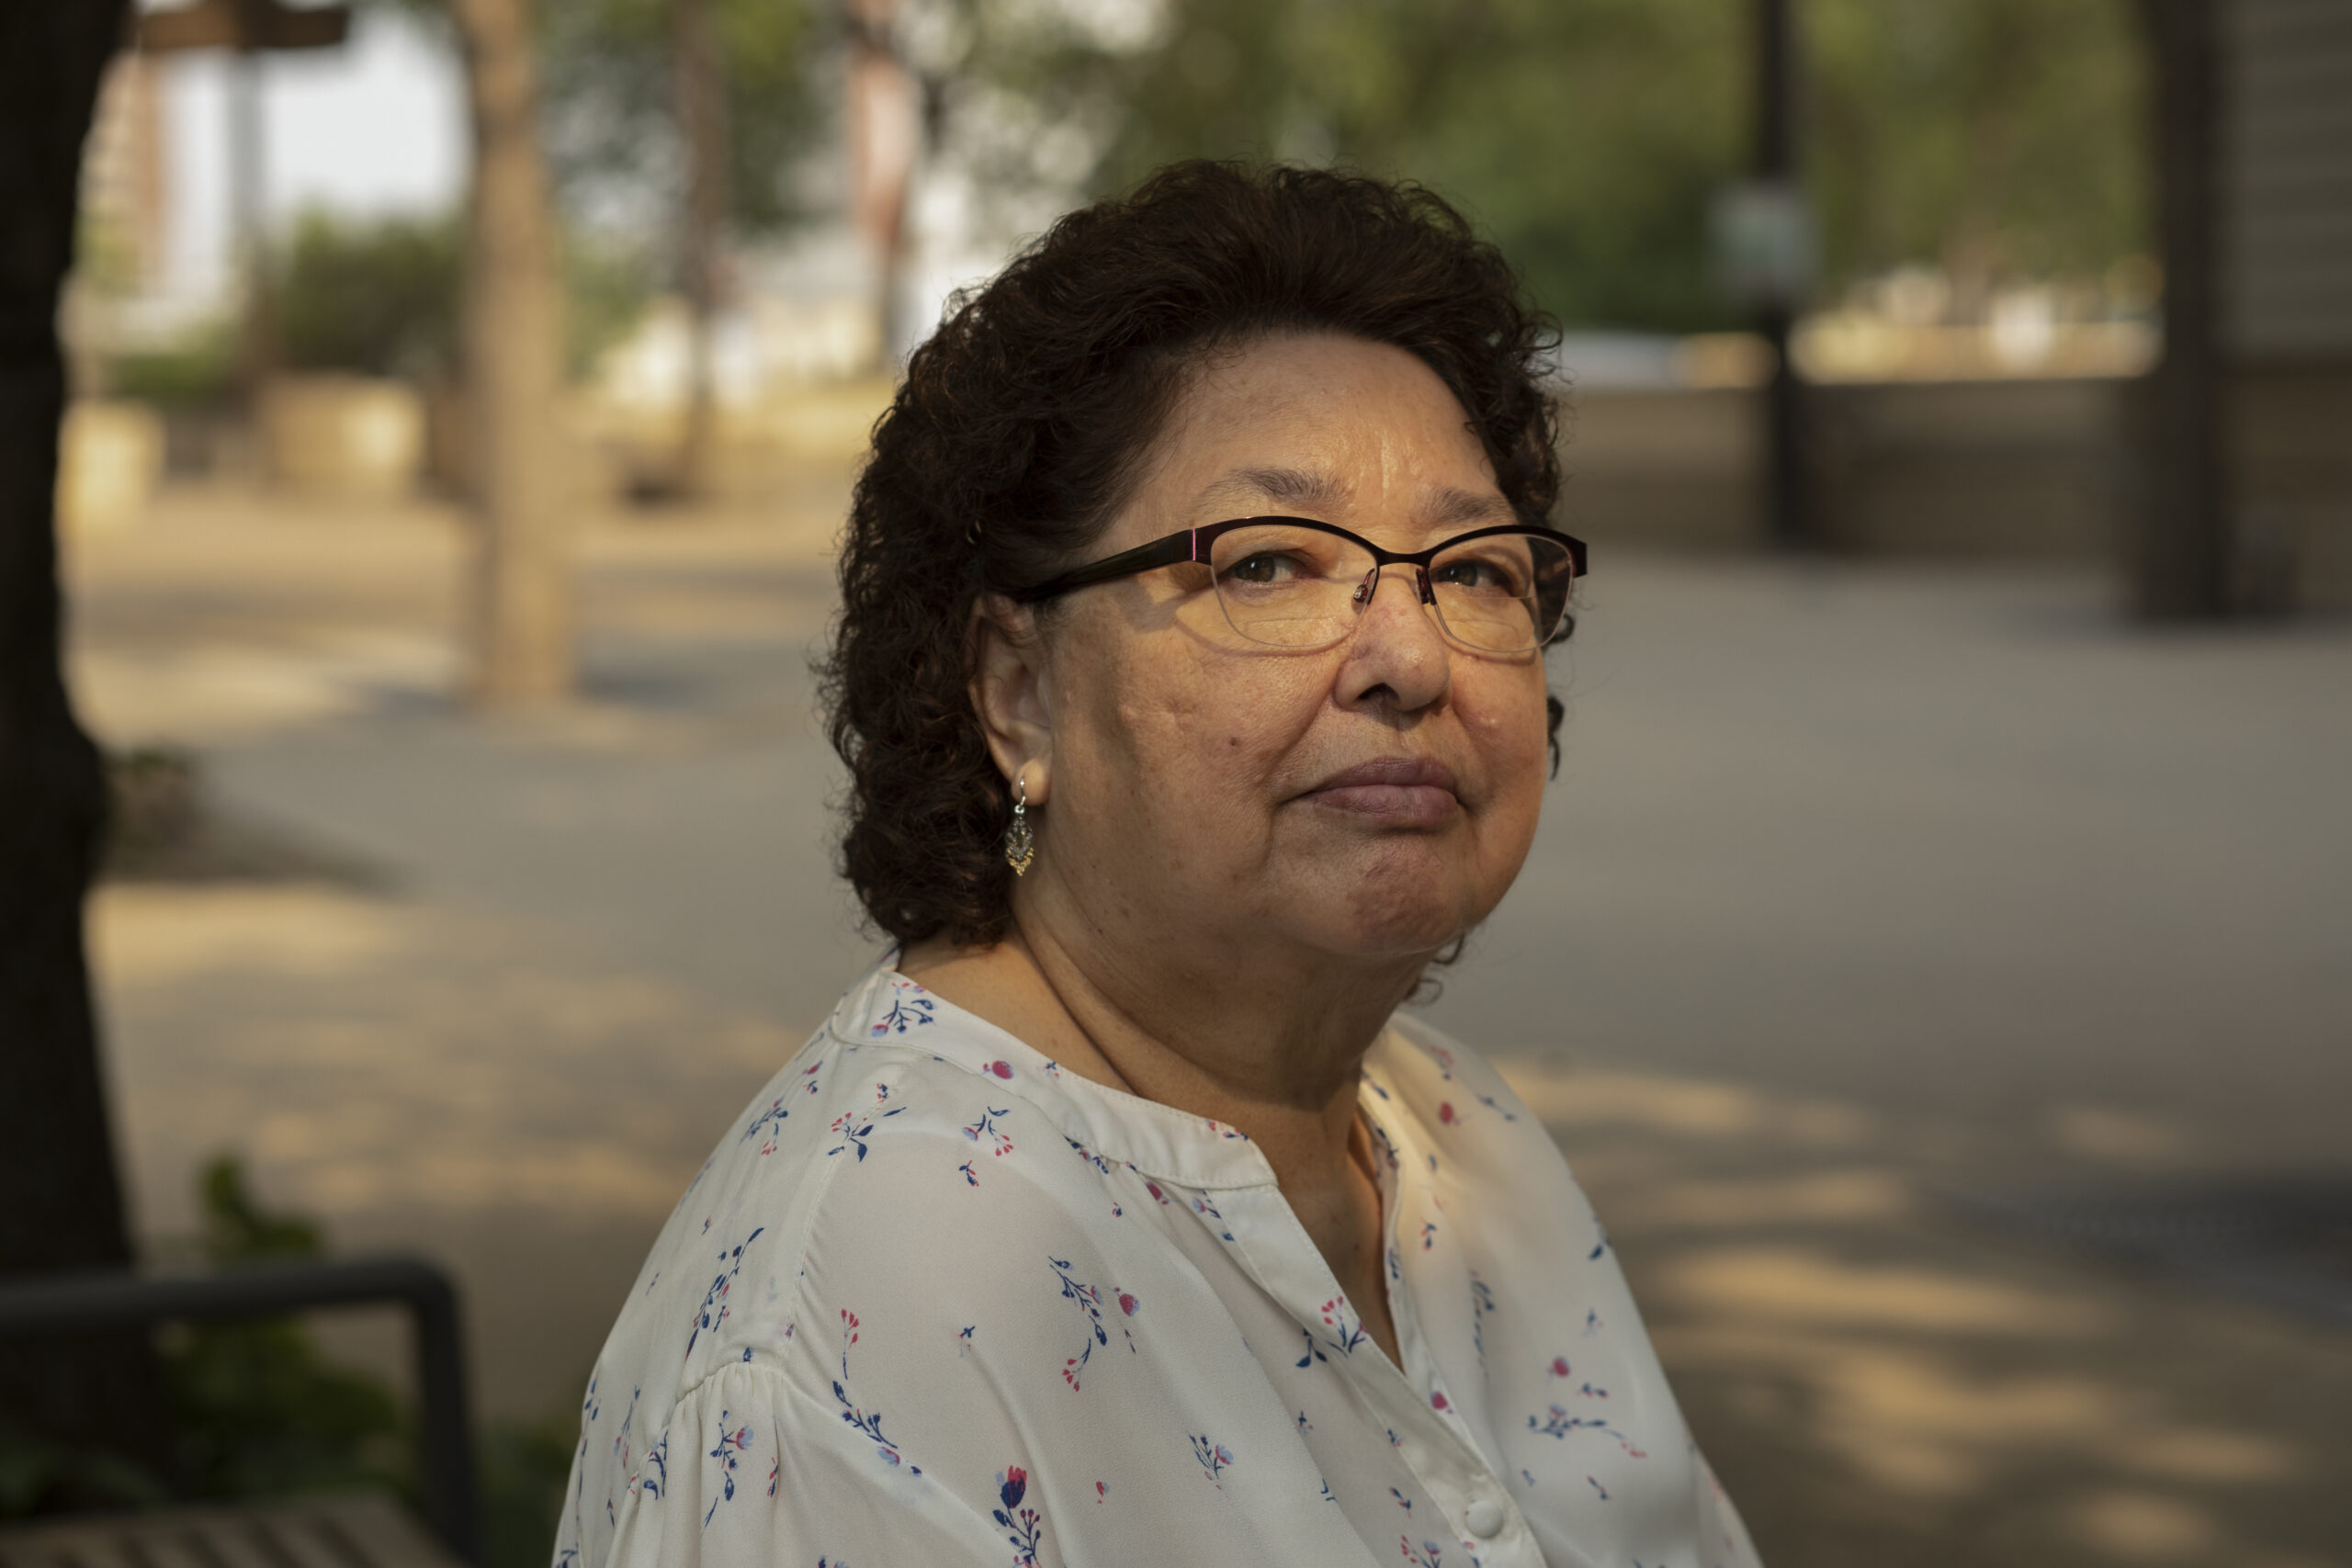 May Sarah Cardinal sits for a portrait outside the Law Courts building in Edmonton, Alberta, Canada...